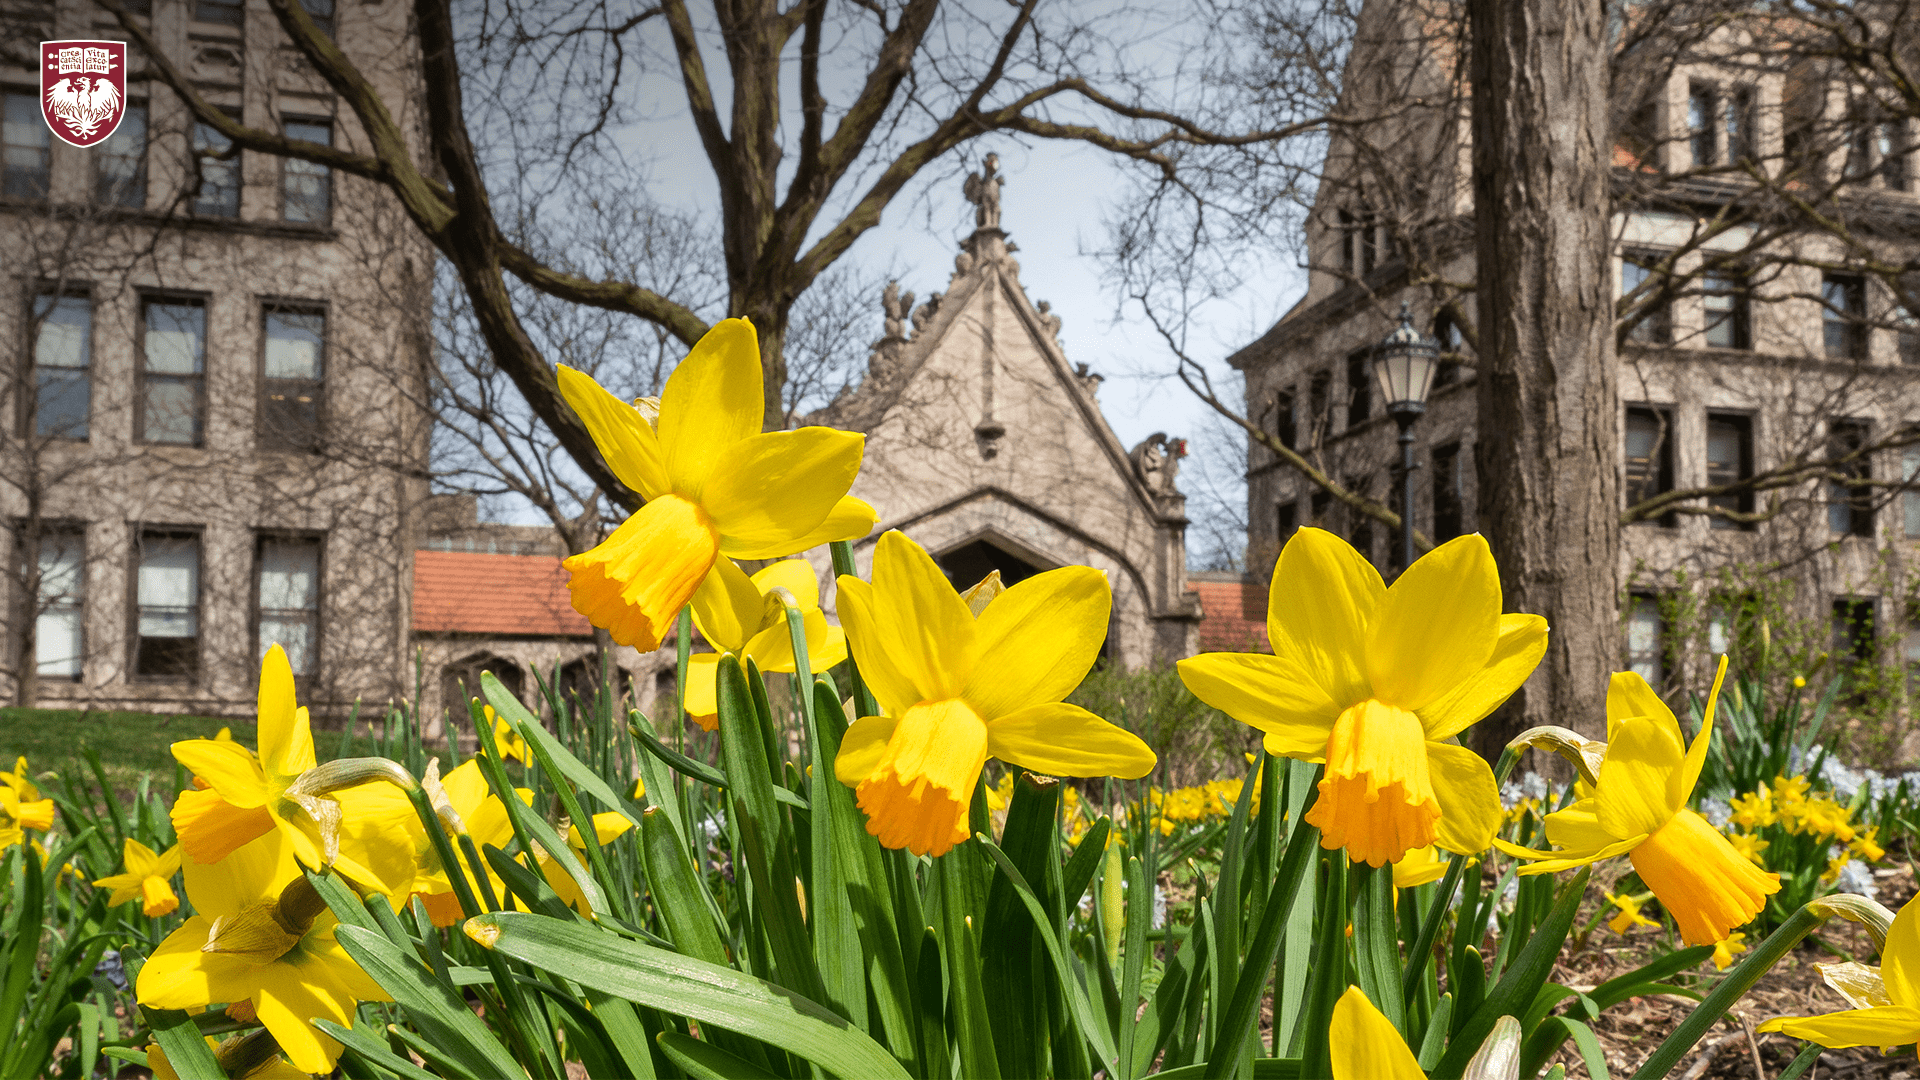 Yellow daffodil blooms with a Gothic arch entrance to the main quad in the background